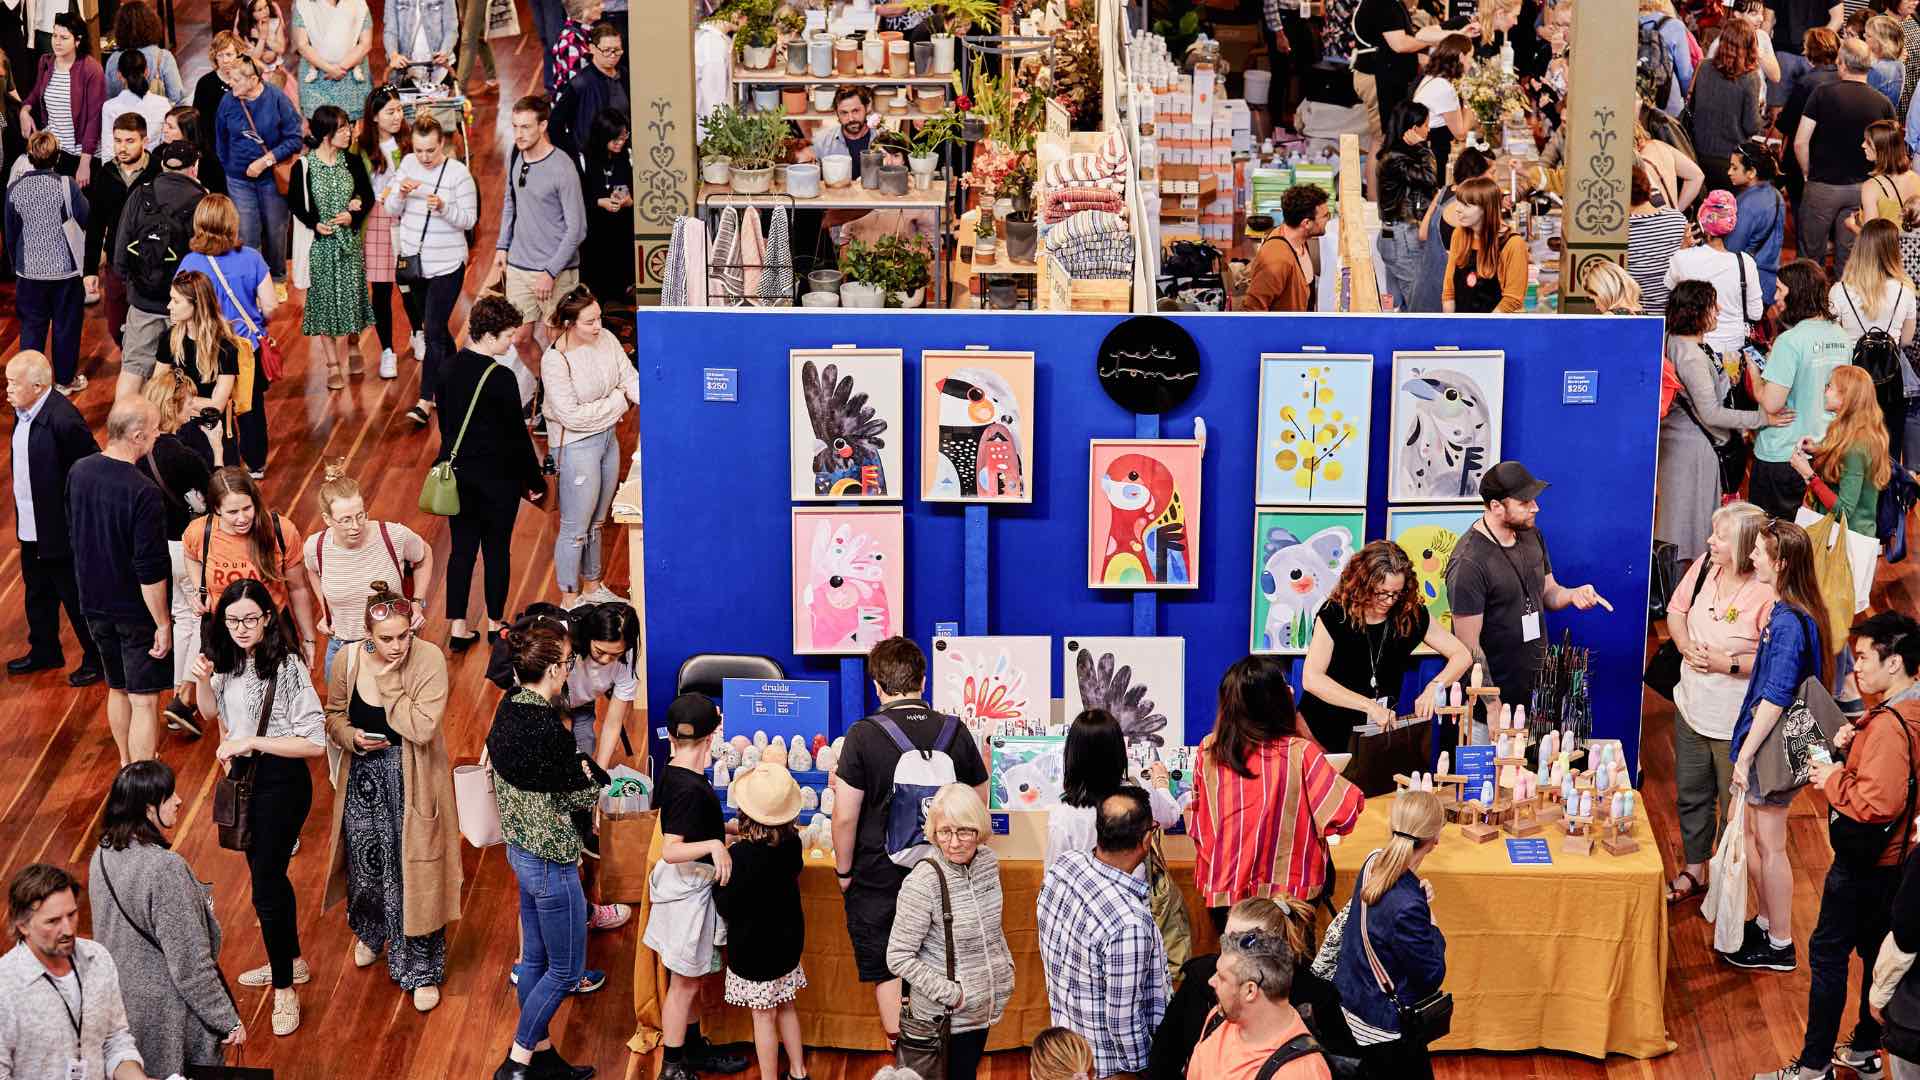 Photo of vendors and crowds at The Big Design Market.